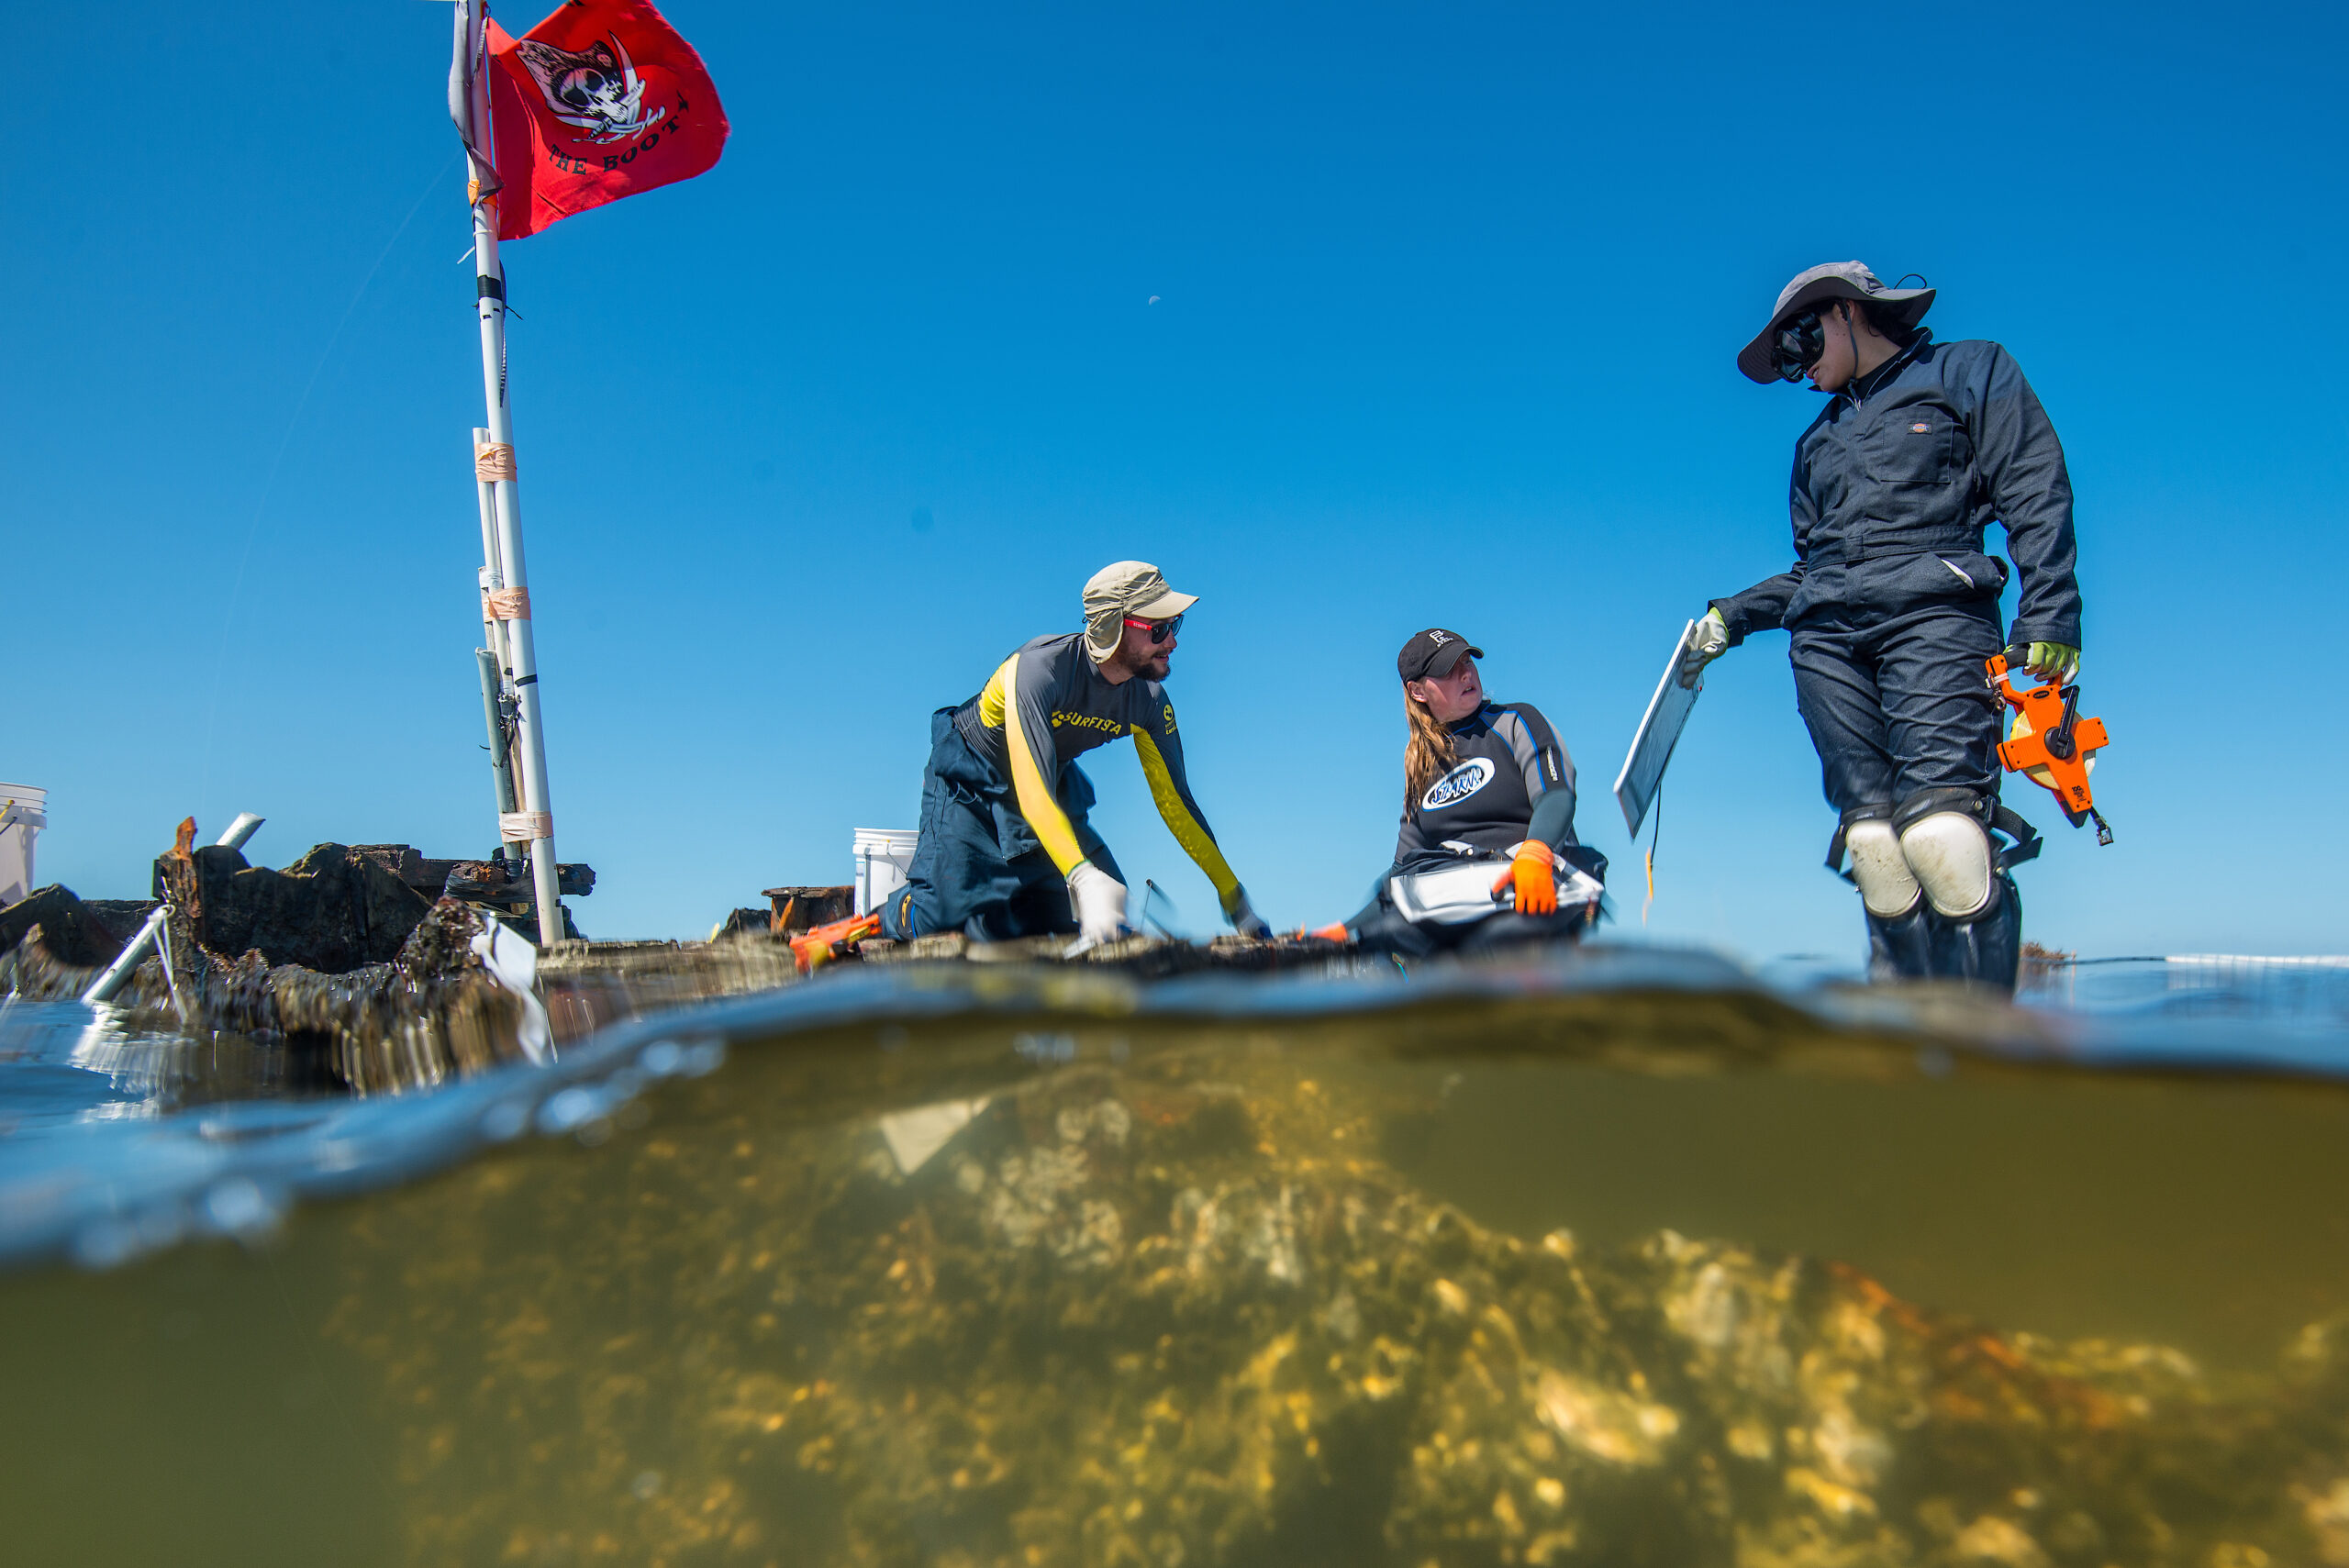 image: researchers at work on a partially submerged shipwreck.